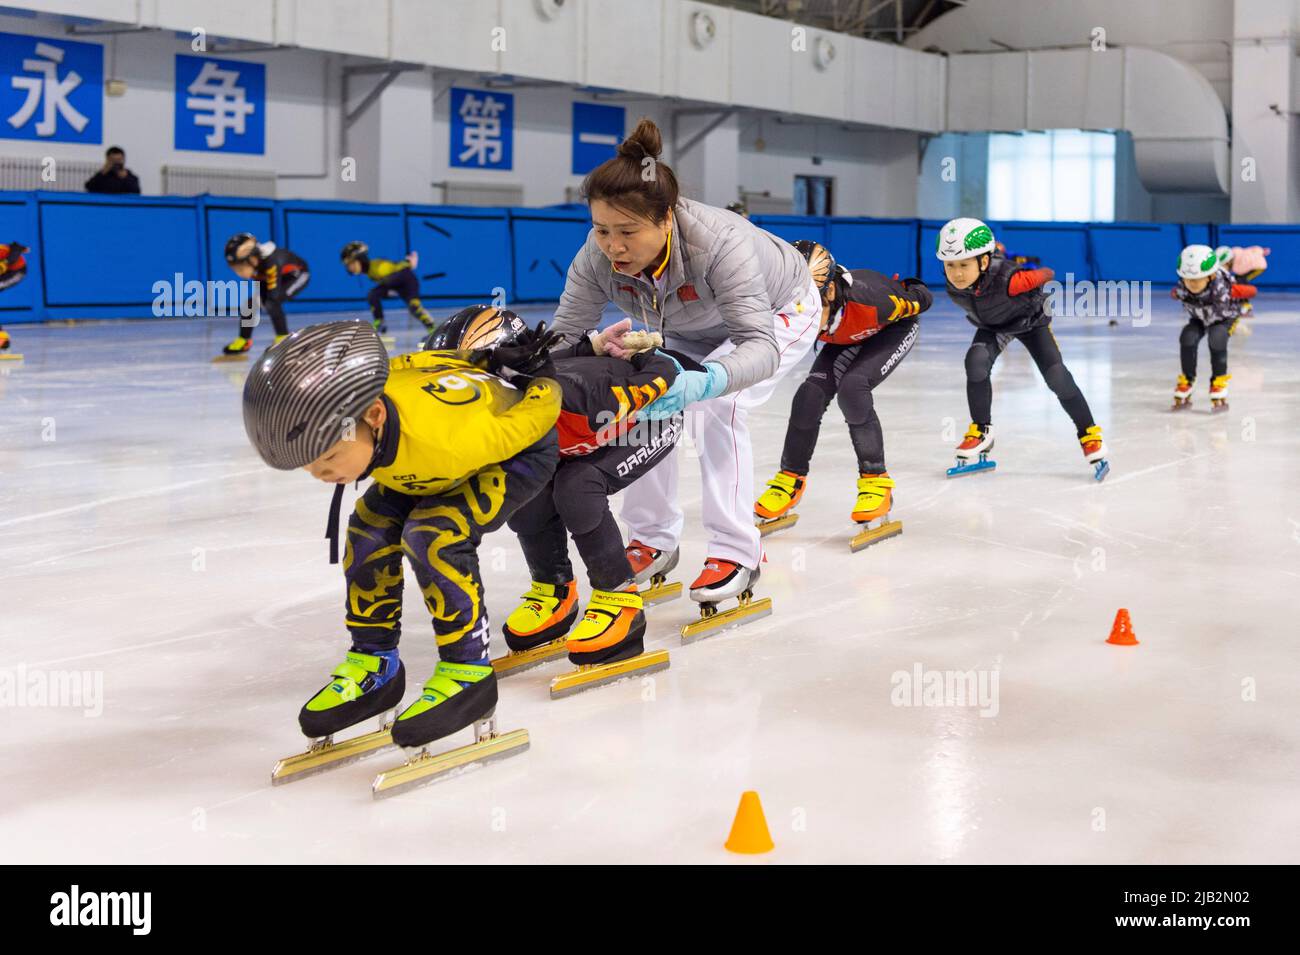 (220602) -- QITAIHE, June 2, 2022 (Xinhua) -- Zhao Xiaobing, coach of Qitaihe Juvenile's Short-Track Speed Skating Amateur Sports School guides young athletes during a training session at Qitaihe Sports Center in Qitaihe City, northeast China's Heilongjiang Province, May 30, 2022. Qitaihe City in Heilongjiang Province, famed for its short-track speed skating talents, has trained 10 world champions including Yang Yang, Wang Meng and Fan Kexin. Generations of coachs in the city have endeavored to discover and train young talents for short-track speed skating. (Xinhua/Xie Jianfei) Stock Photo